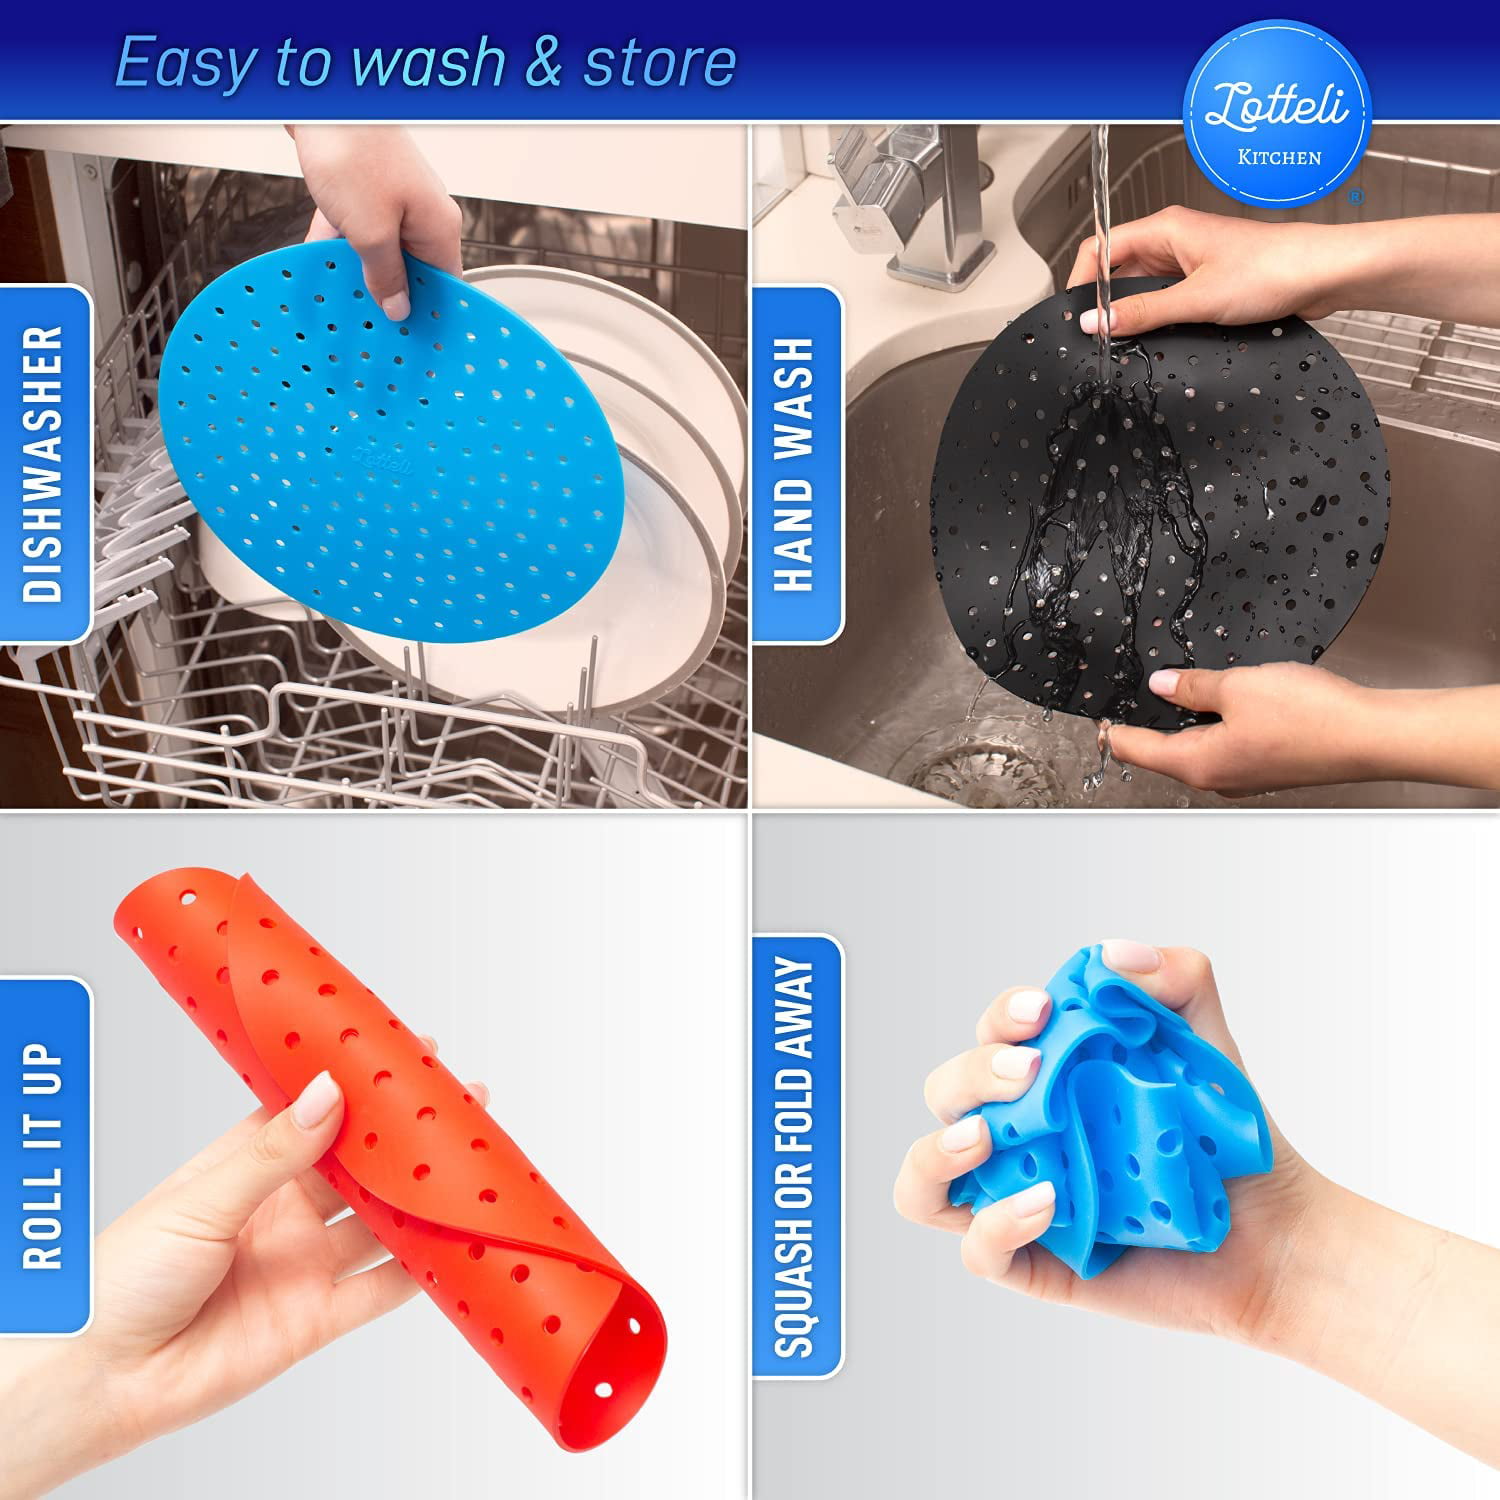 Reusable Silicone Air Fryer Liners 8.5 Inch by Linda's Essentials (3 Pack,  Square) - Non Stick Easy Clean Air Fryer Liners Reusable Mats Air Fryer